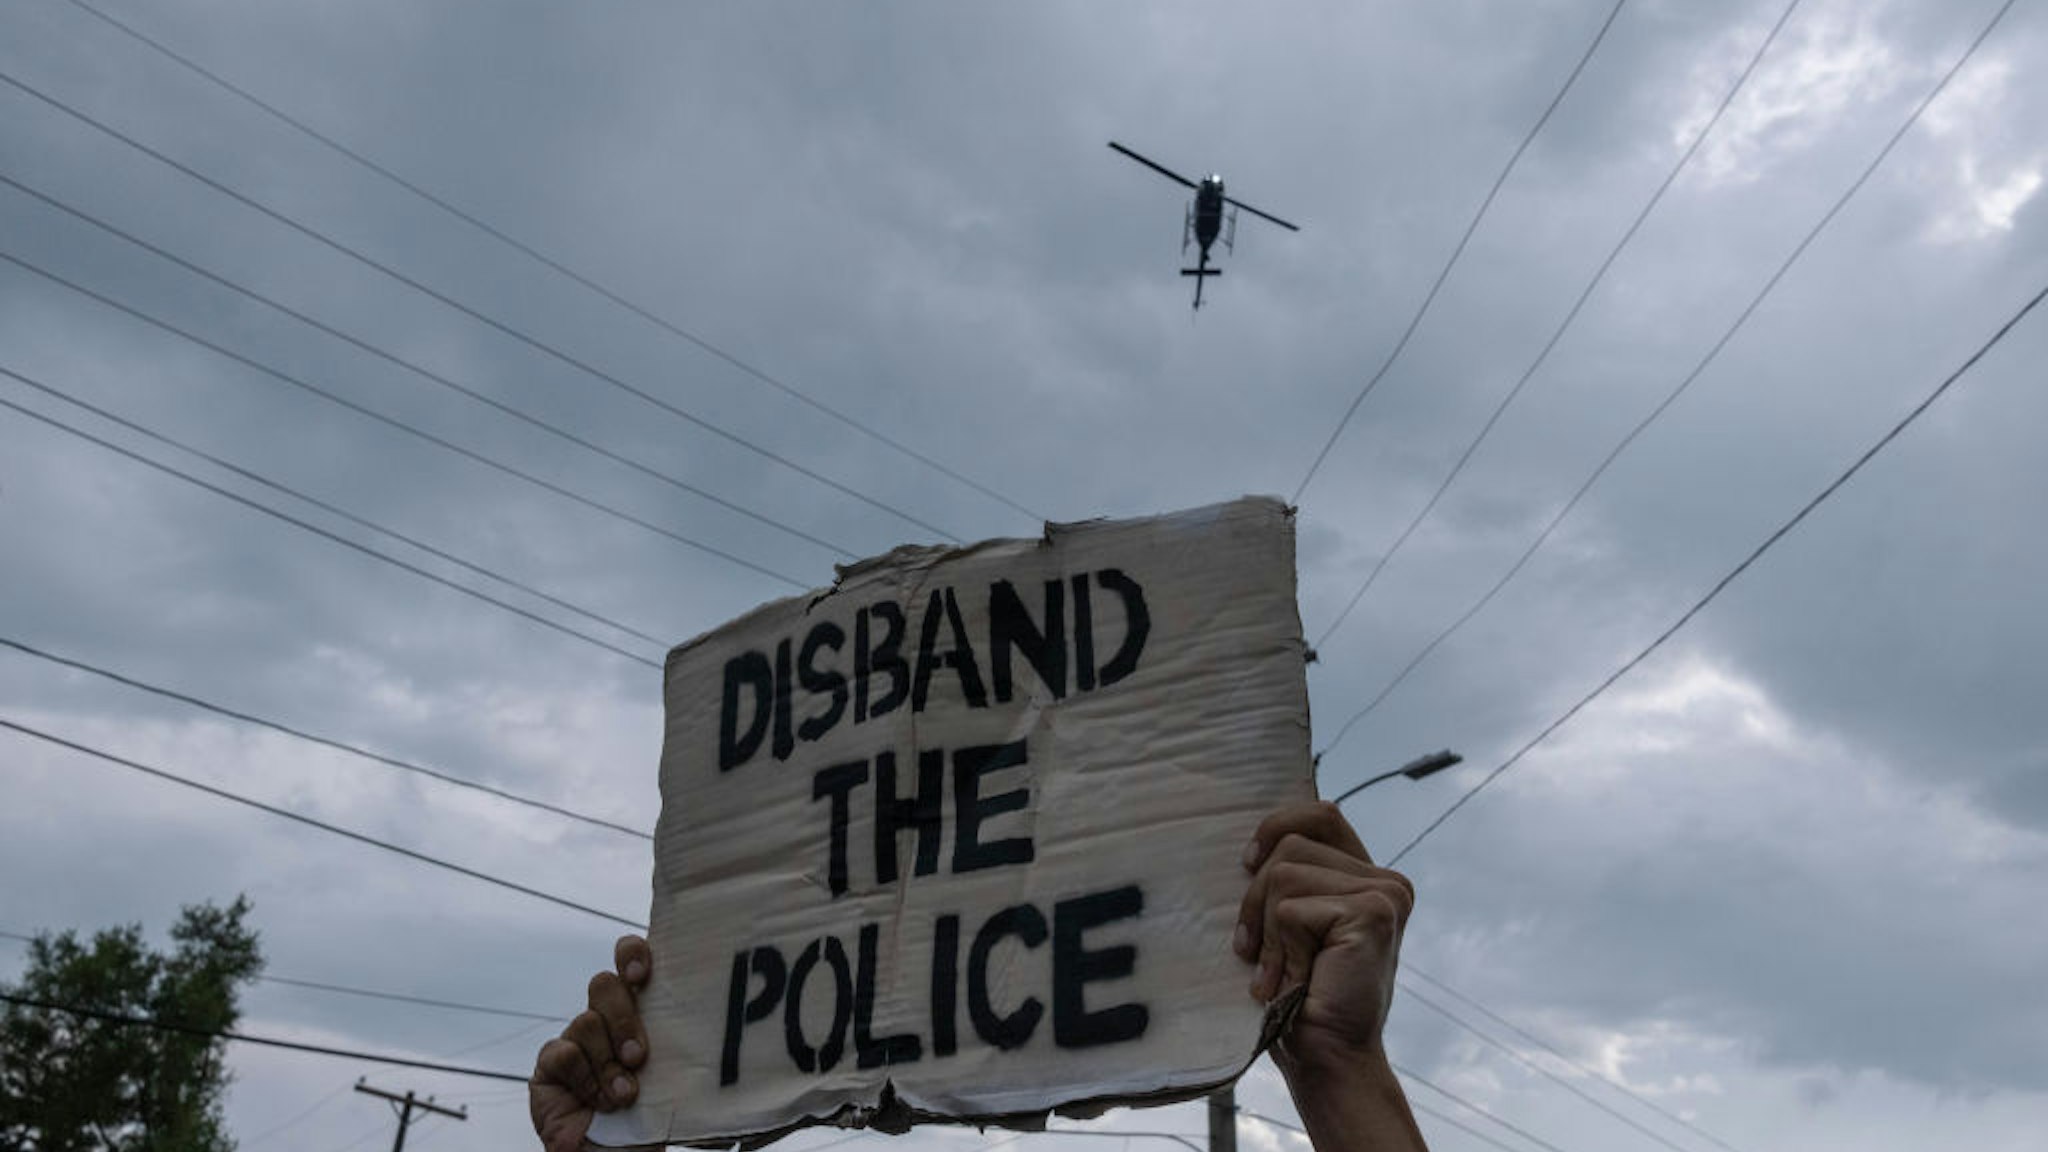 Non-Violent protesters march against police brutality near Detroit's west side as a Detroit police department helicopter fly's overhead. 20-year-old Hakeem Littleton was shot and killed by Detroit Police earlier in the day, July 10,2020.